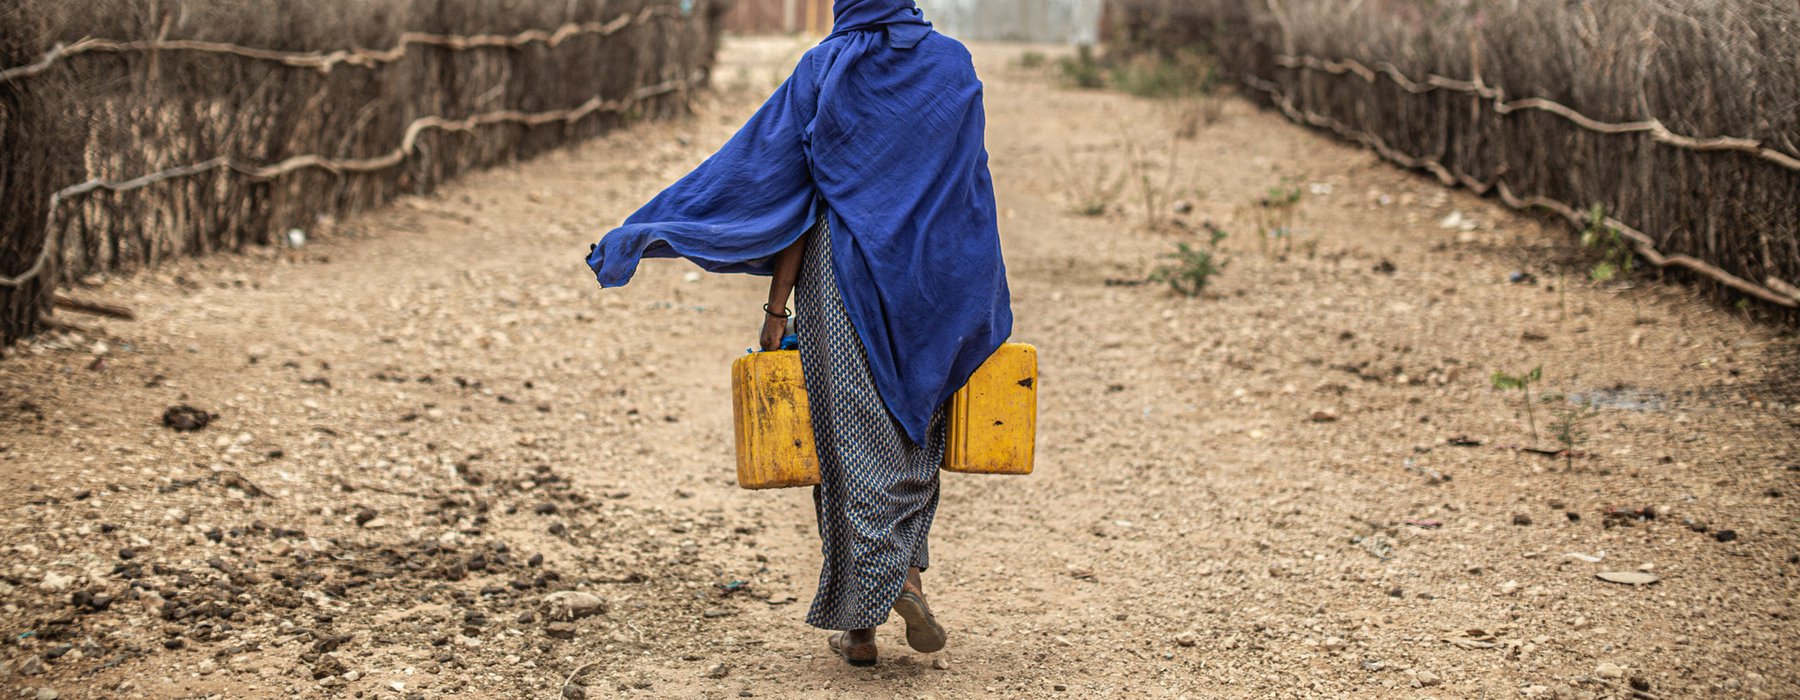 Amina in Ethiopia walks away down an arid path with two water containers. Image: Pablo Tosco/Oxfam Intermon